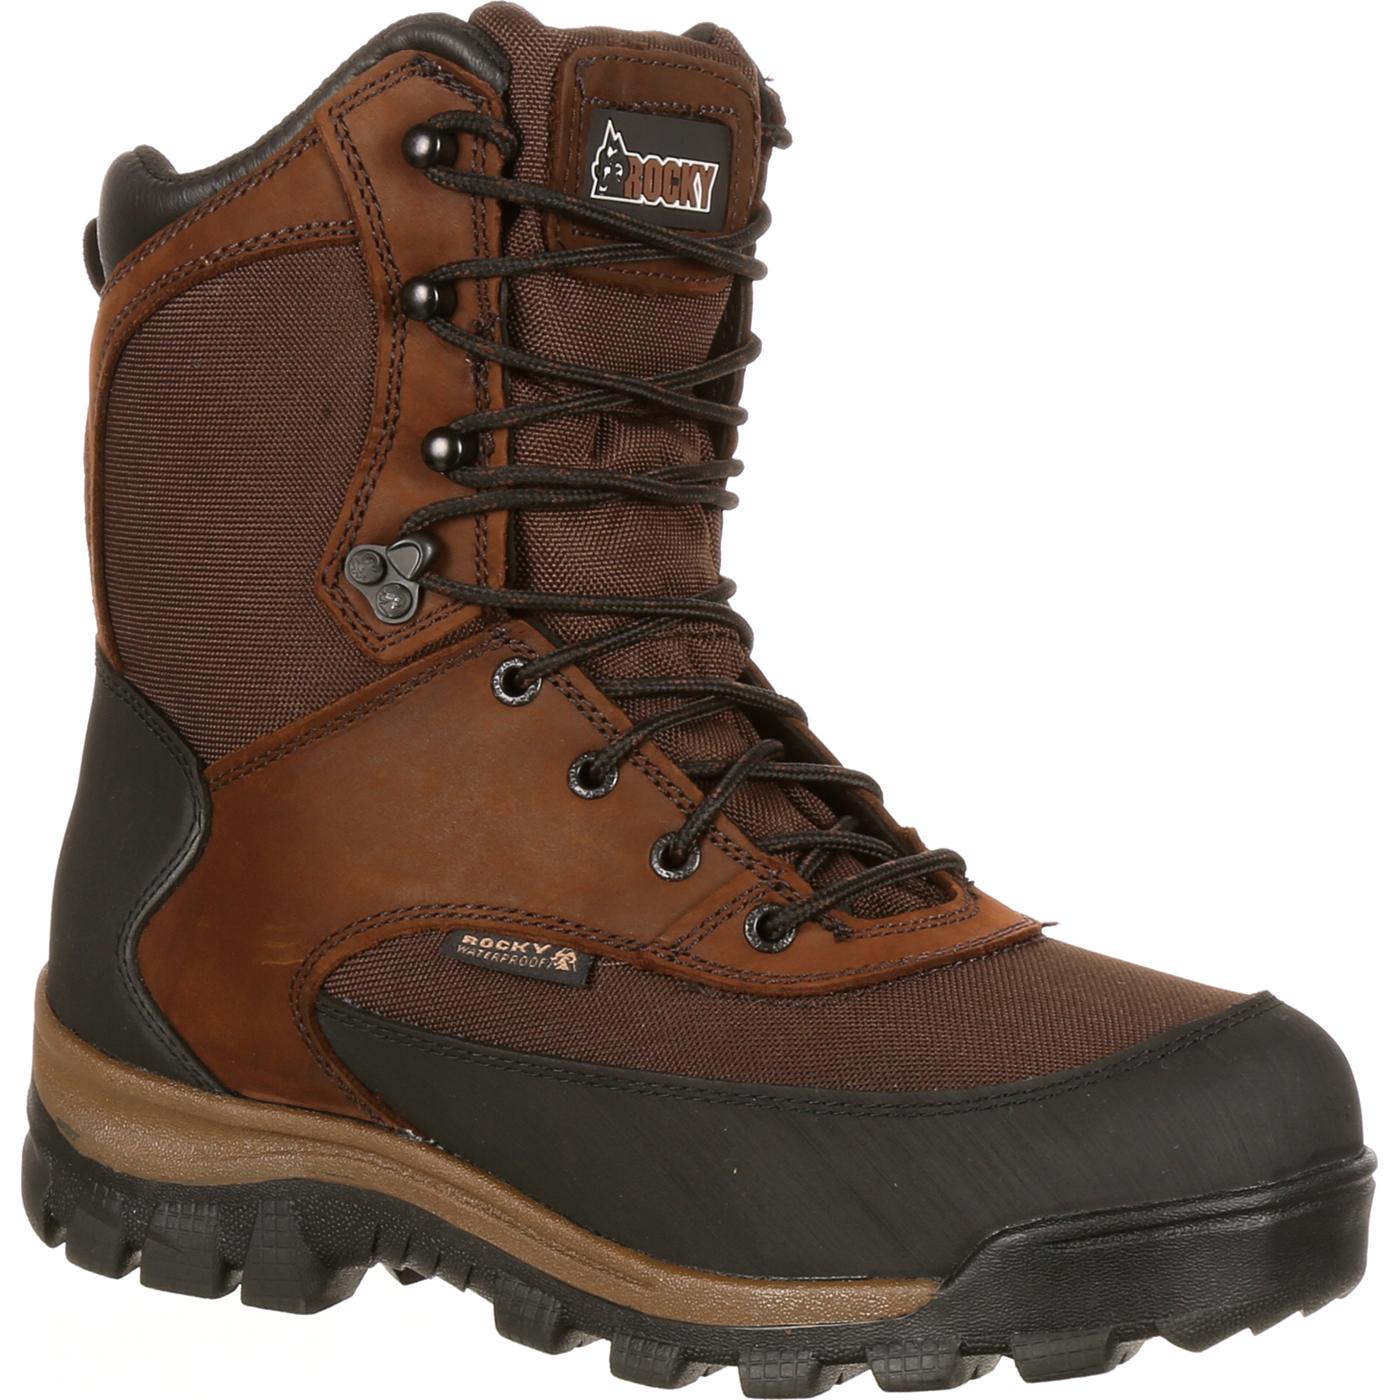 Rocky Core: Waterproof Insulated Outdoor Boot with Traction